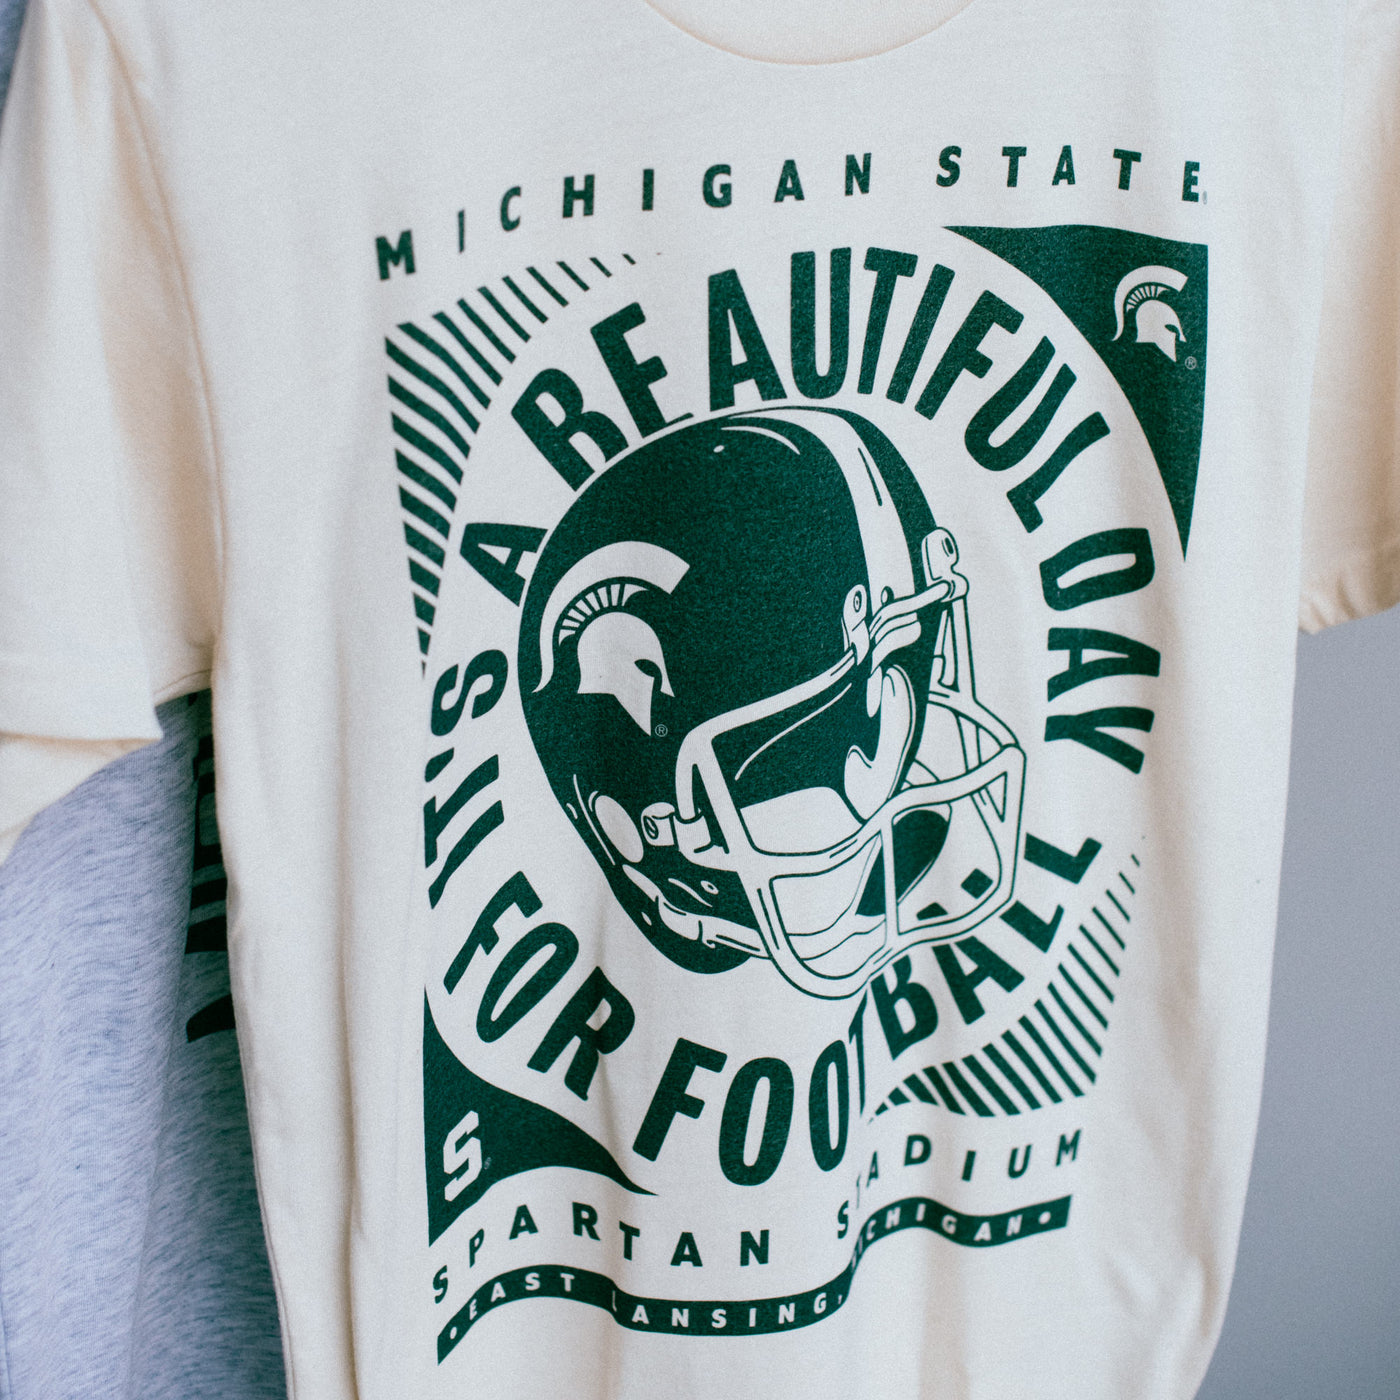 MSU "It's a Beautiful Day For Football" Tee